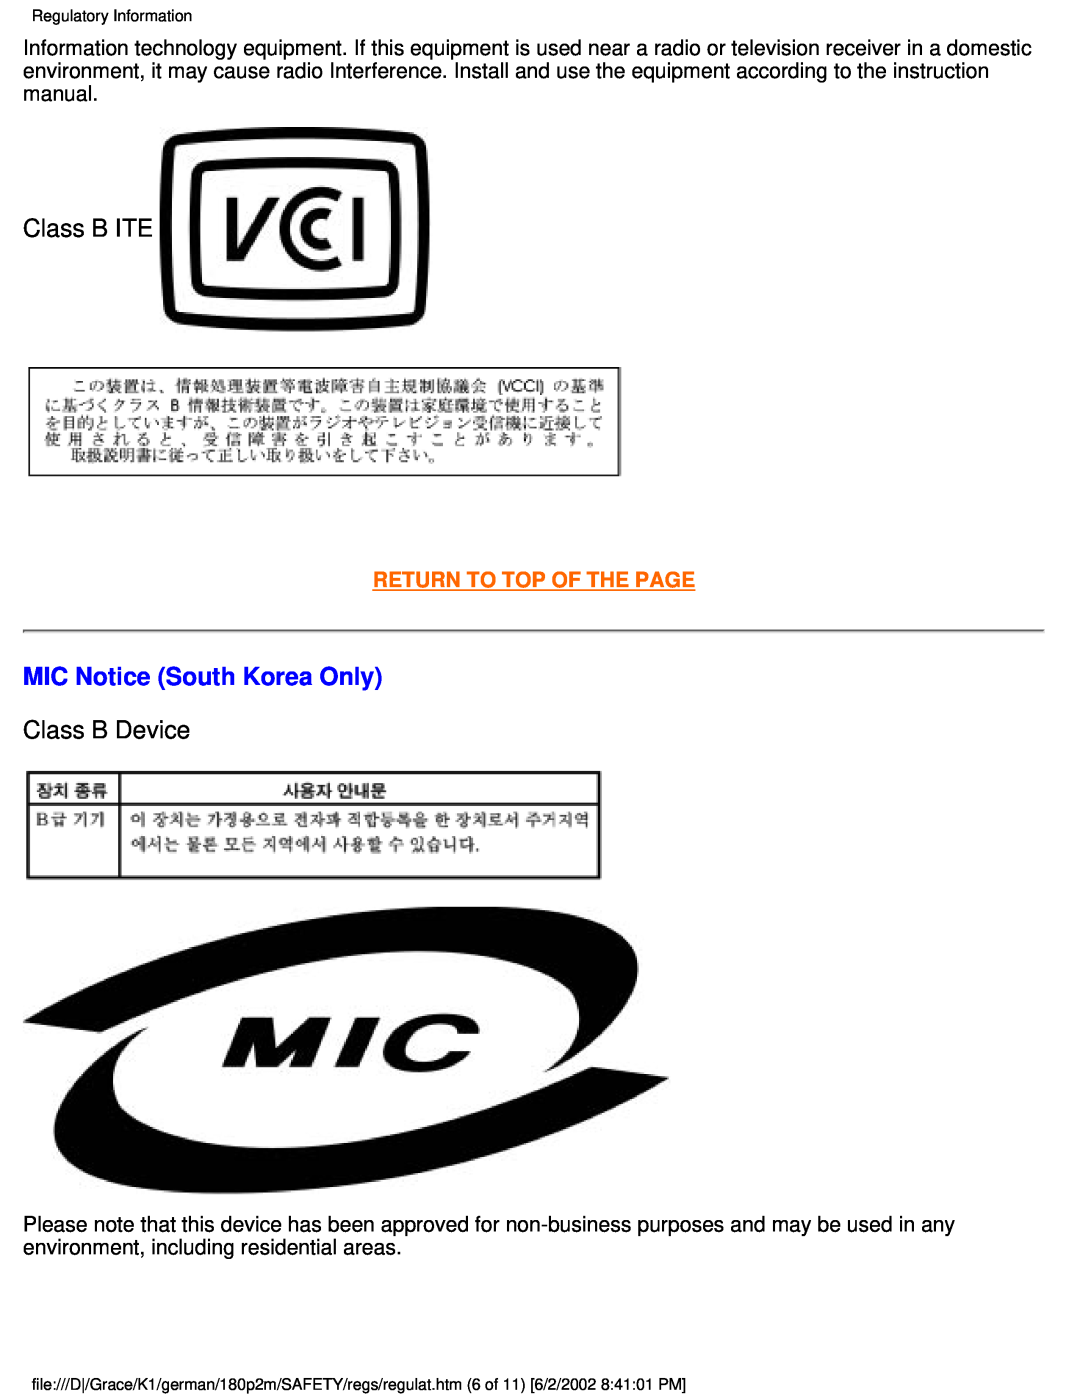 Philips 180P2G user manual Class B ITE, MIC Notice South Korea Only, Class B Device, Return To Top Of The Page 